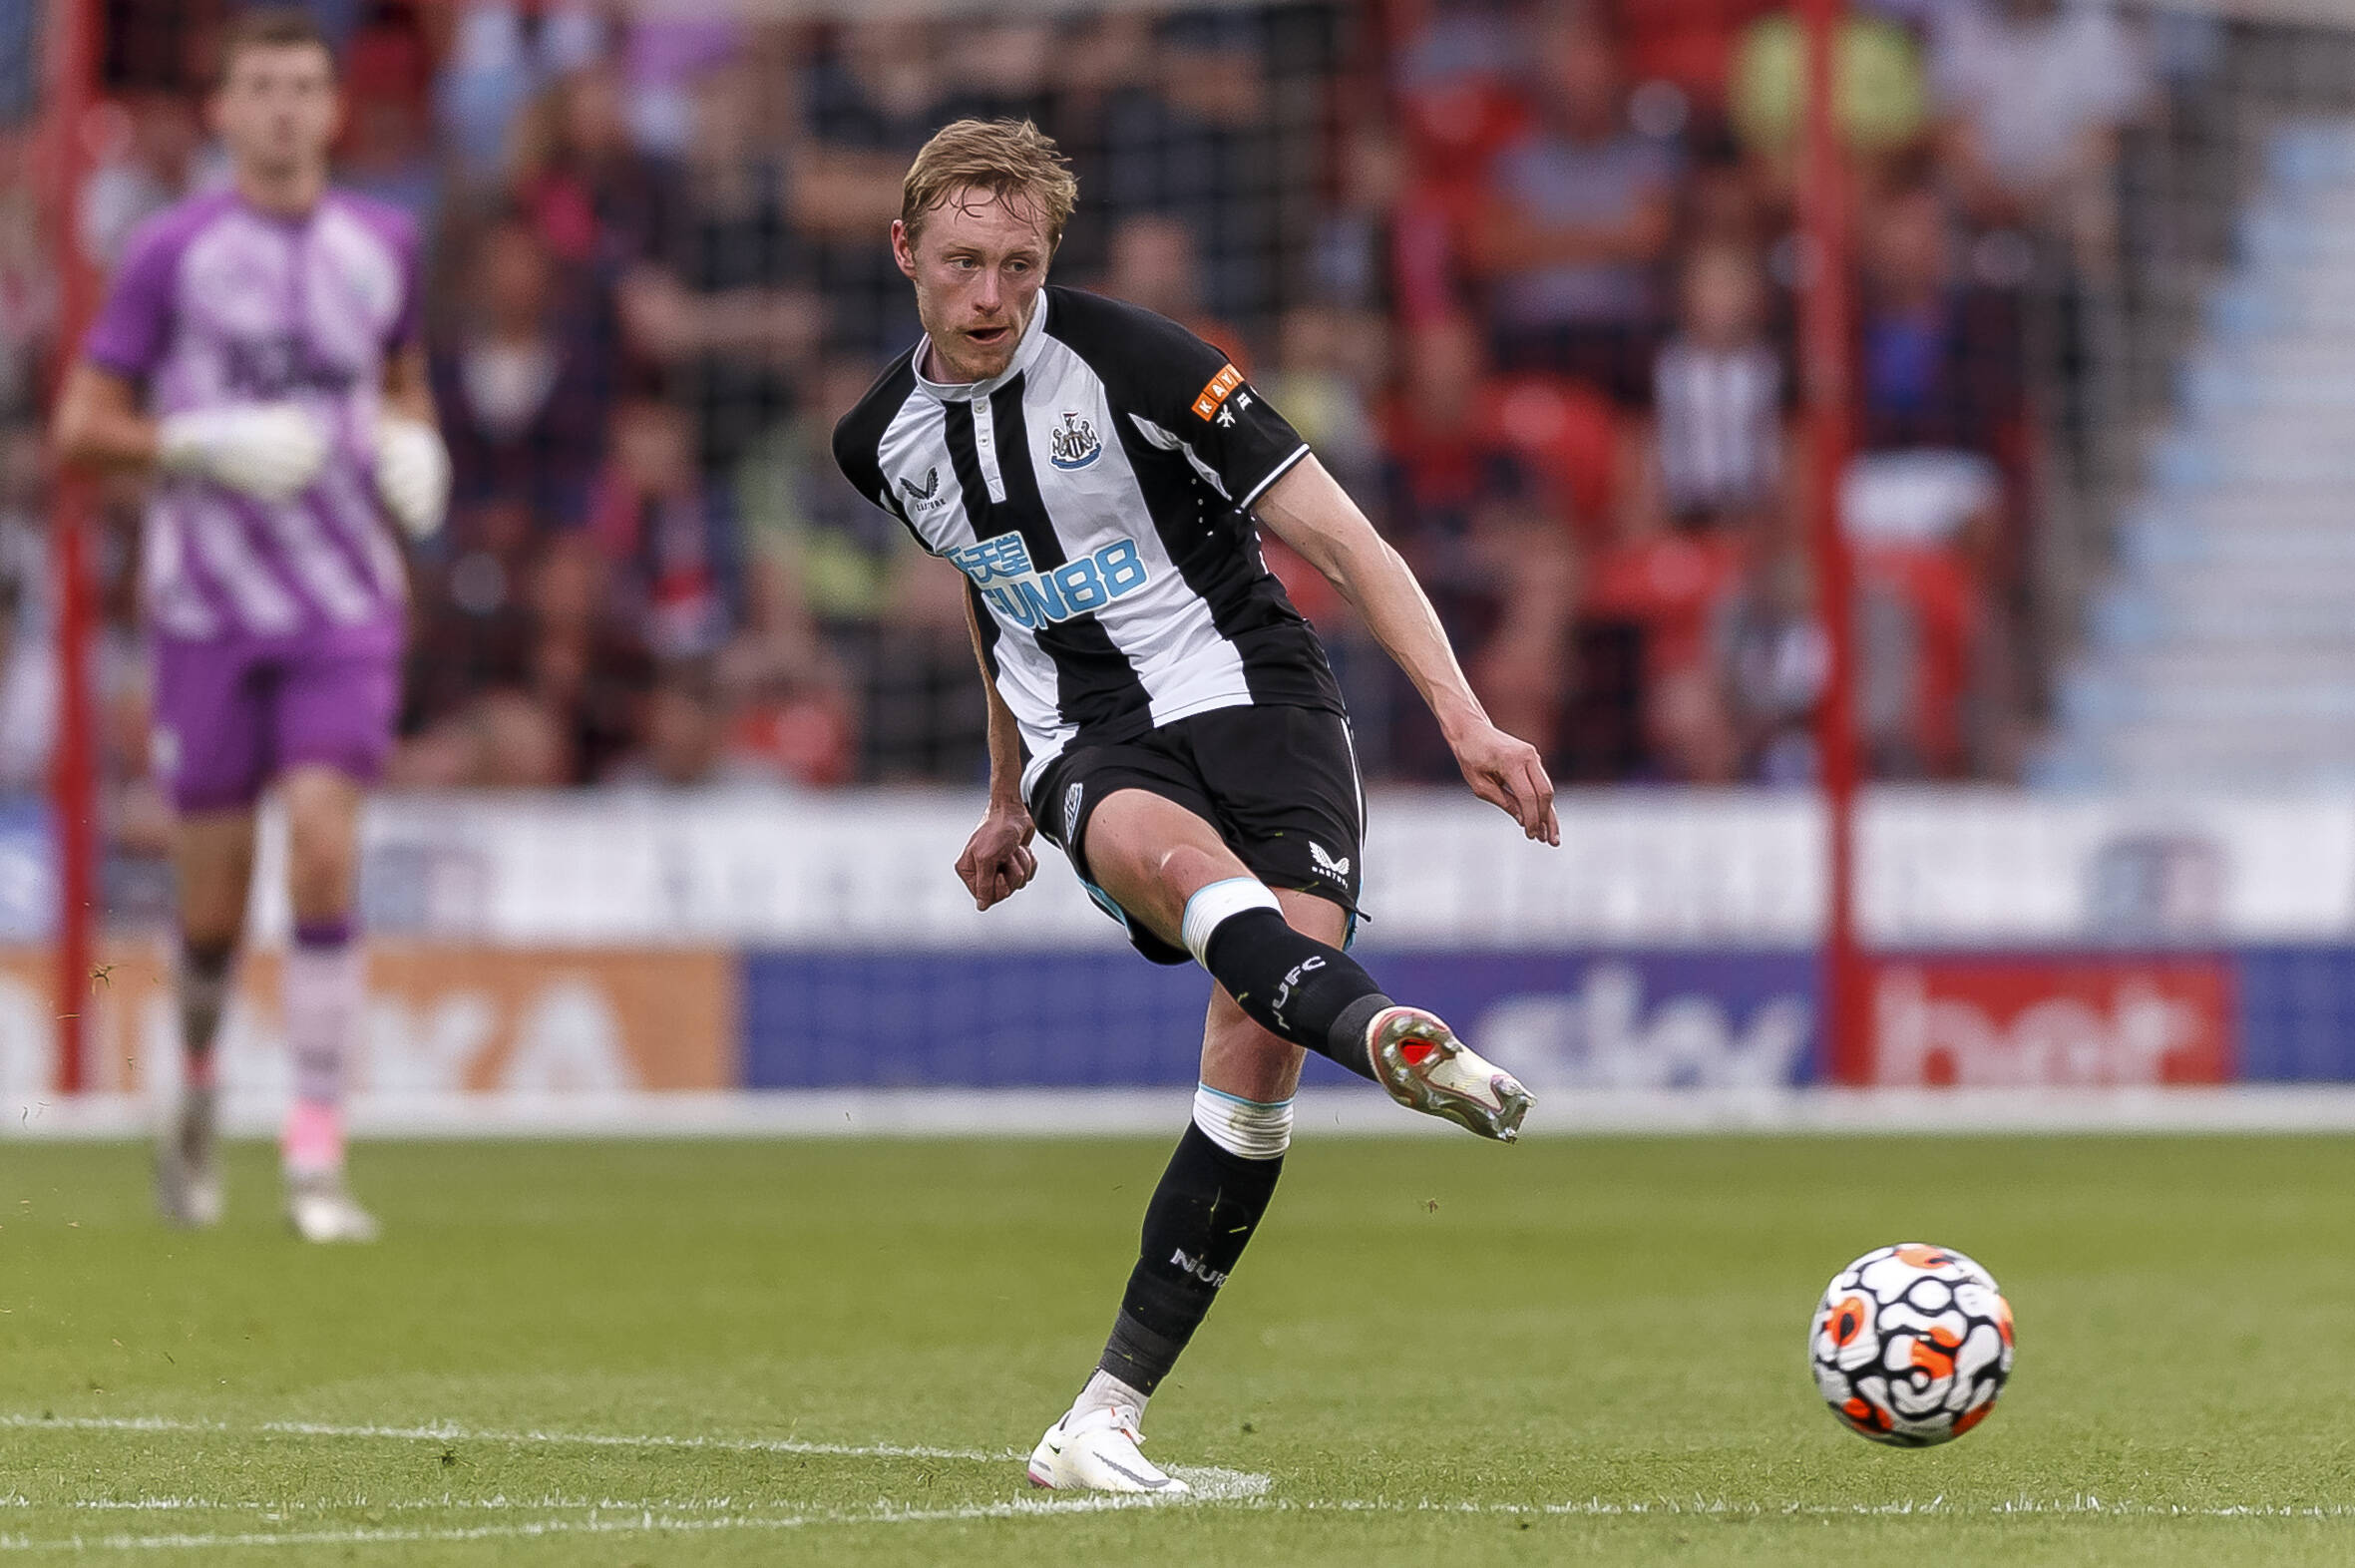 Newcastle hoping to tie Longstaff down to a new contract (Longstaff is seen in the picture)